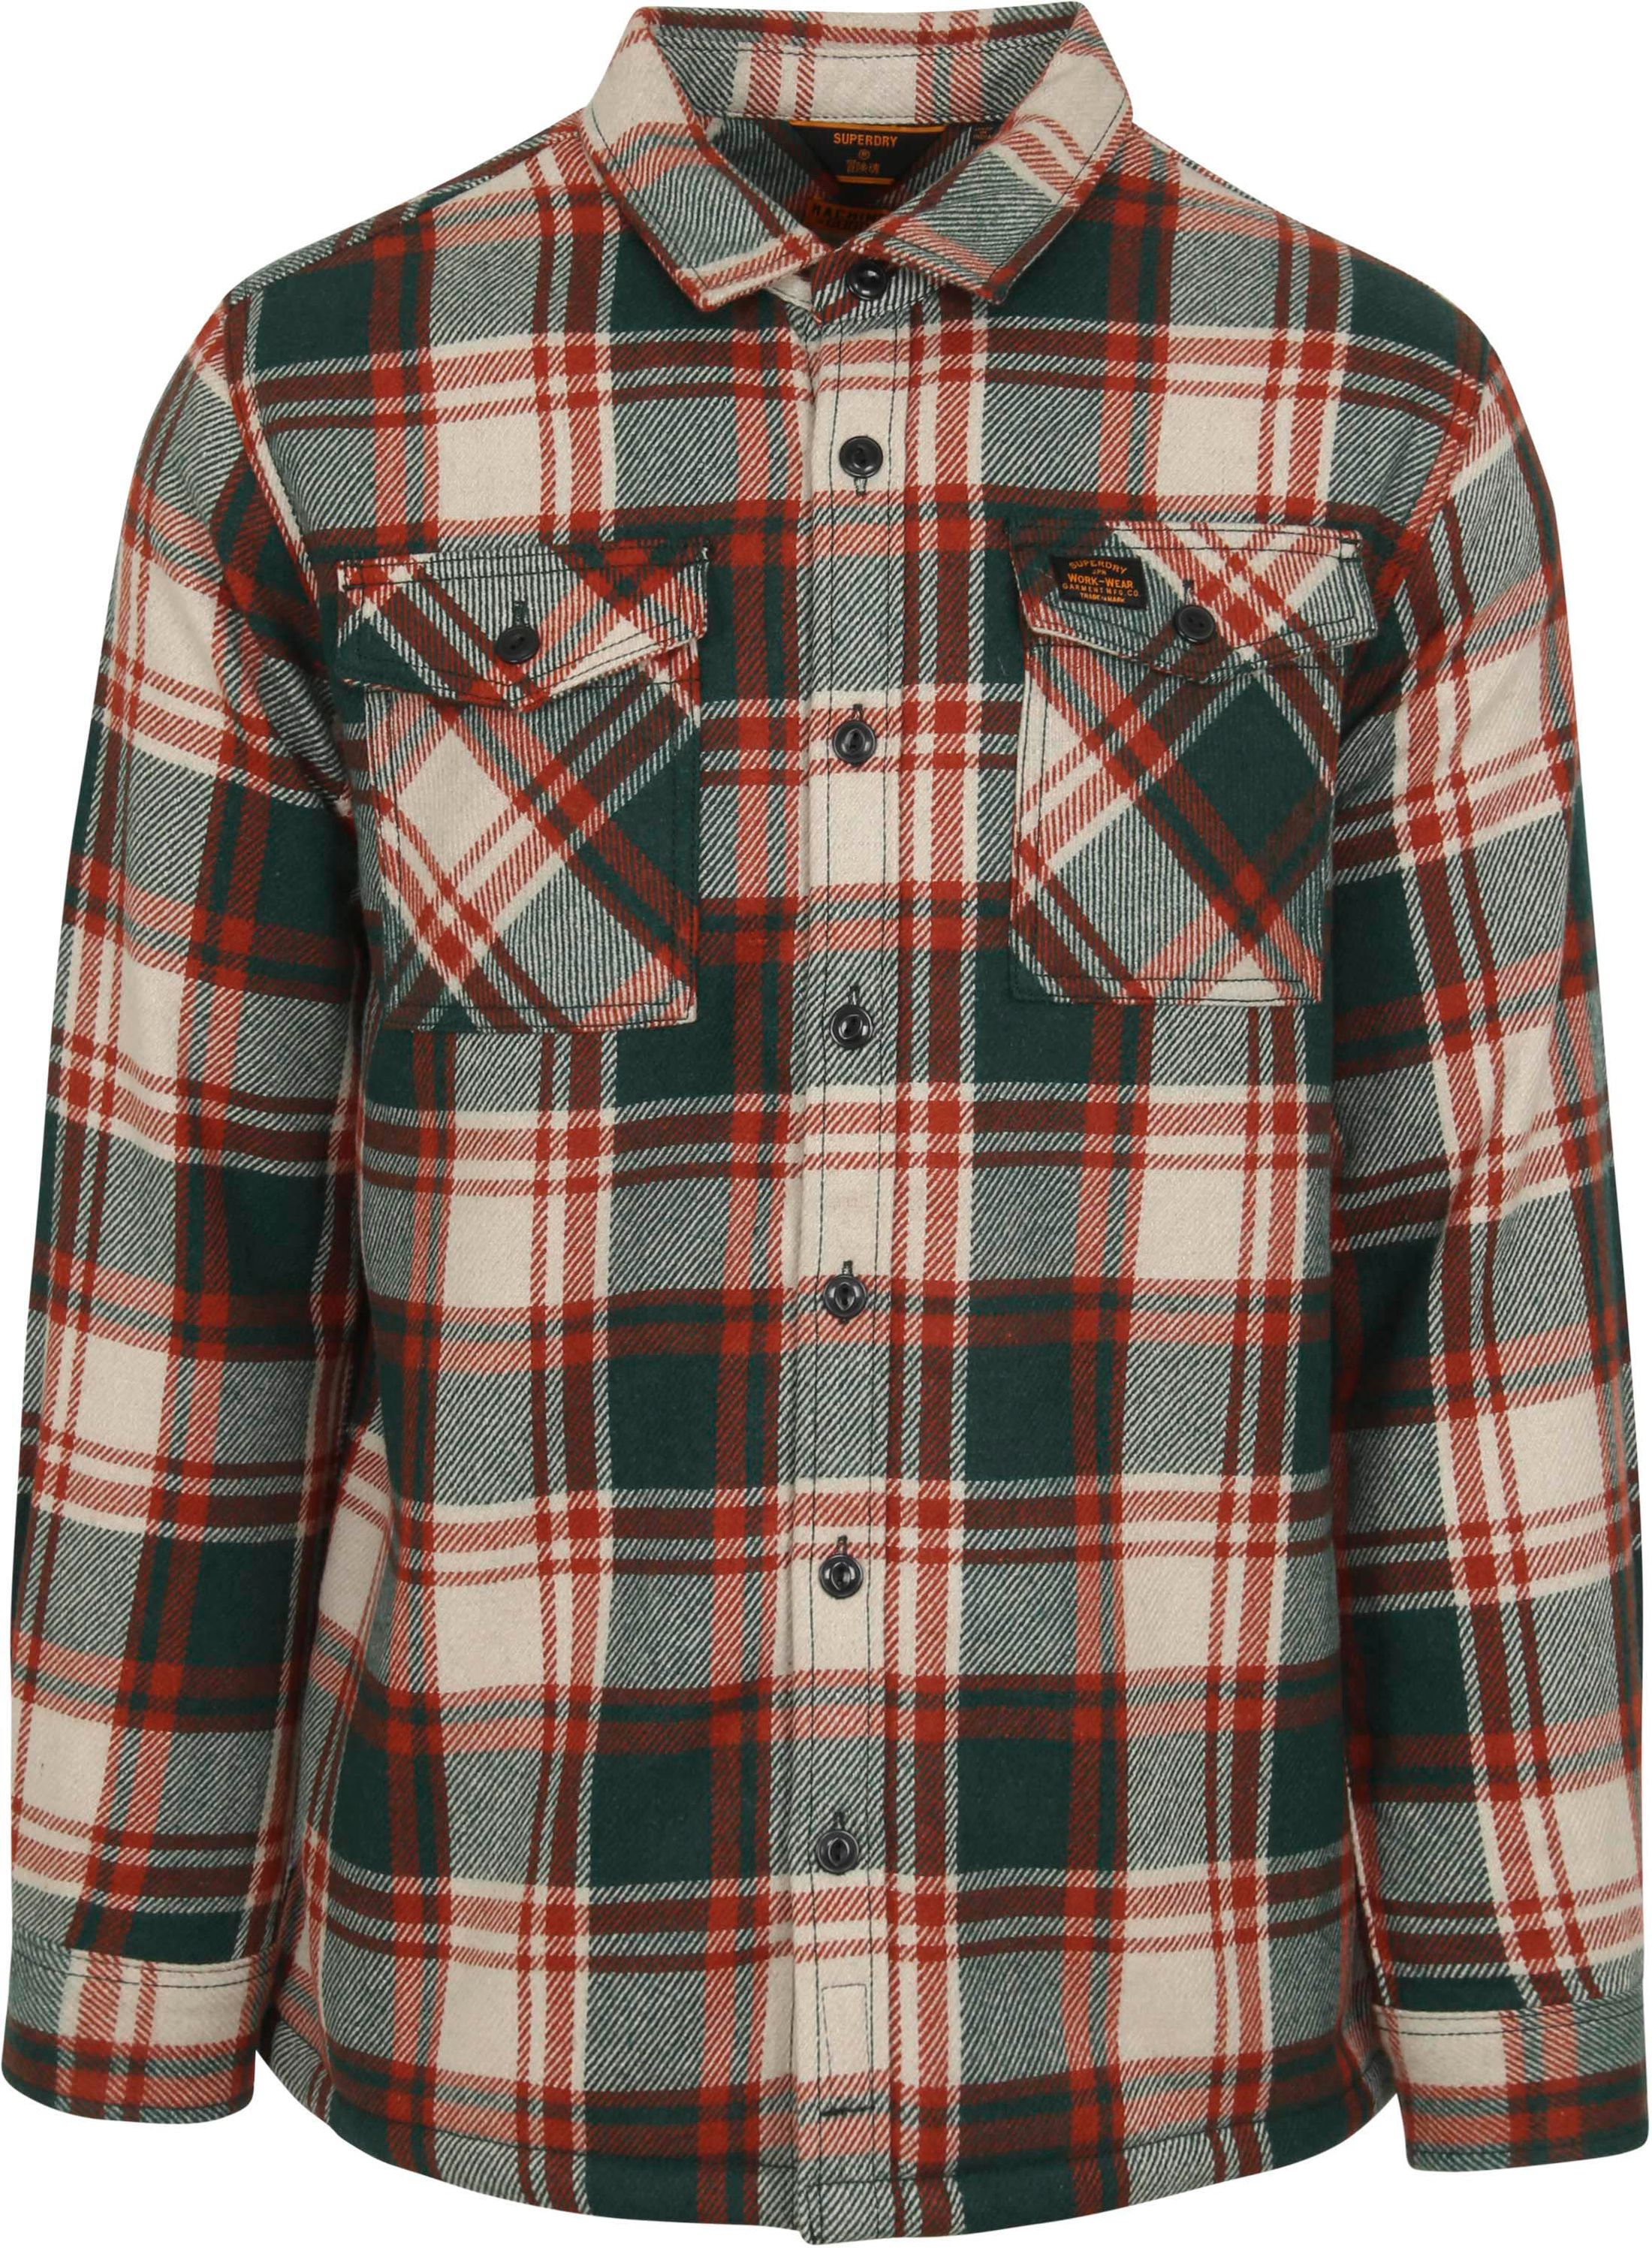 Superdry Miller Overshirt Plaid Blue Green Red size L